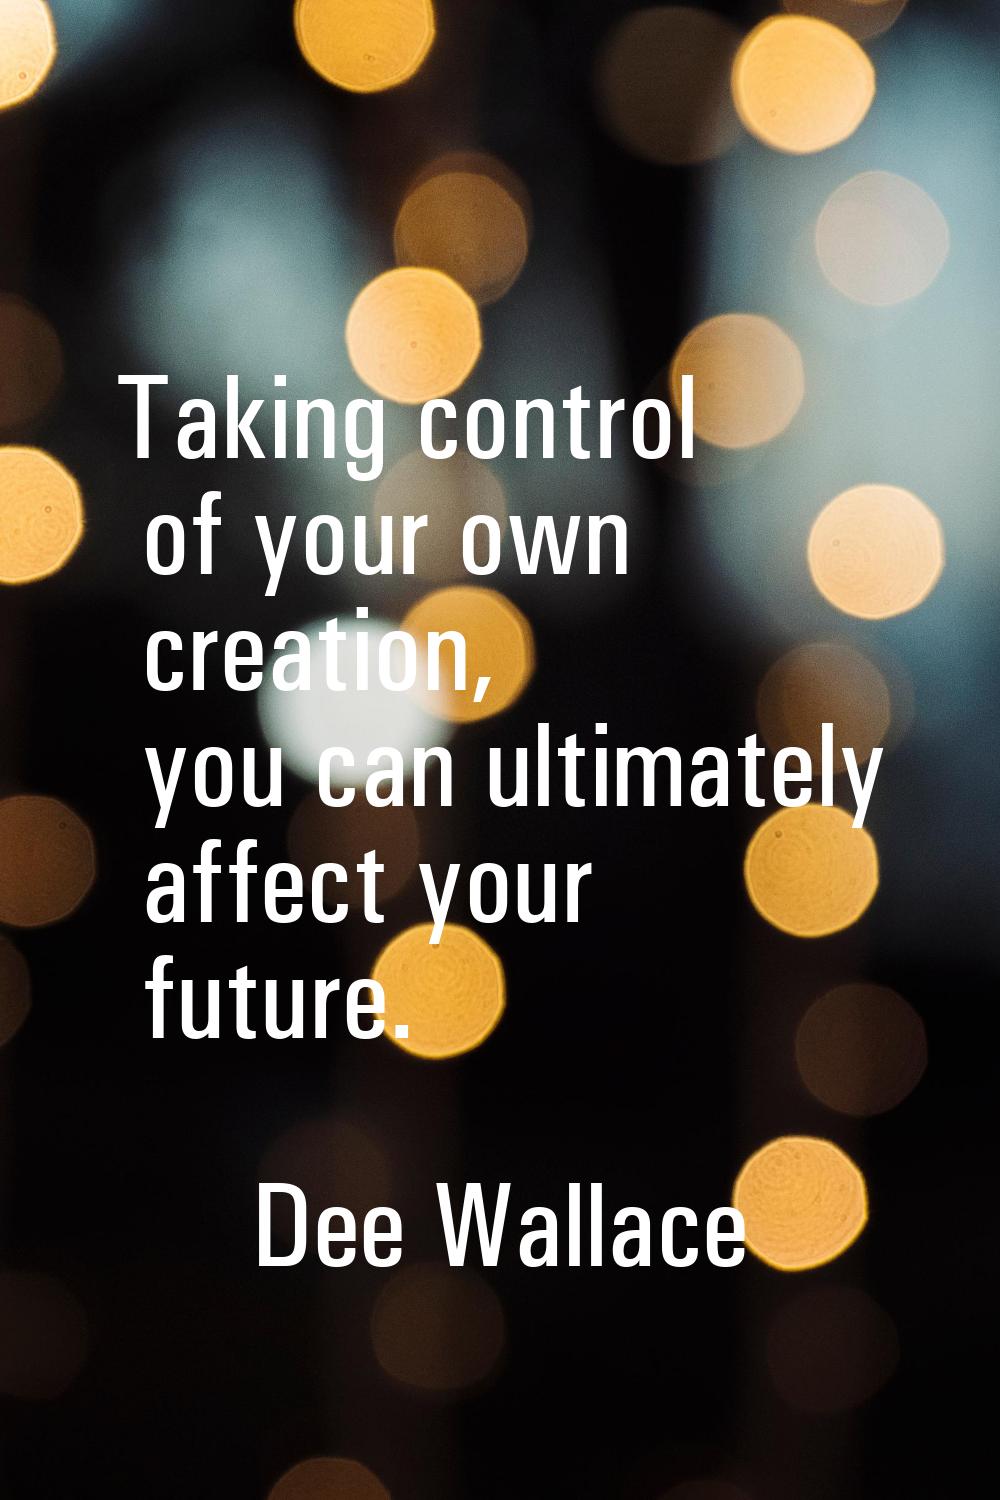 Taking control of your own creation, you can ultimately affect your future.